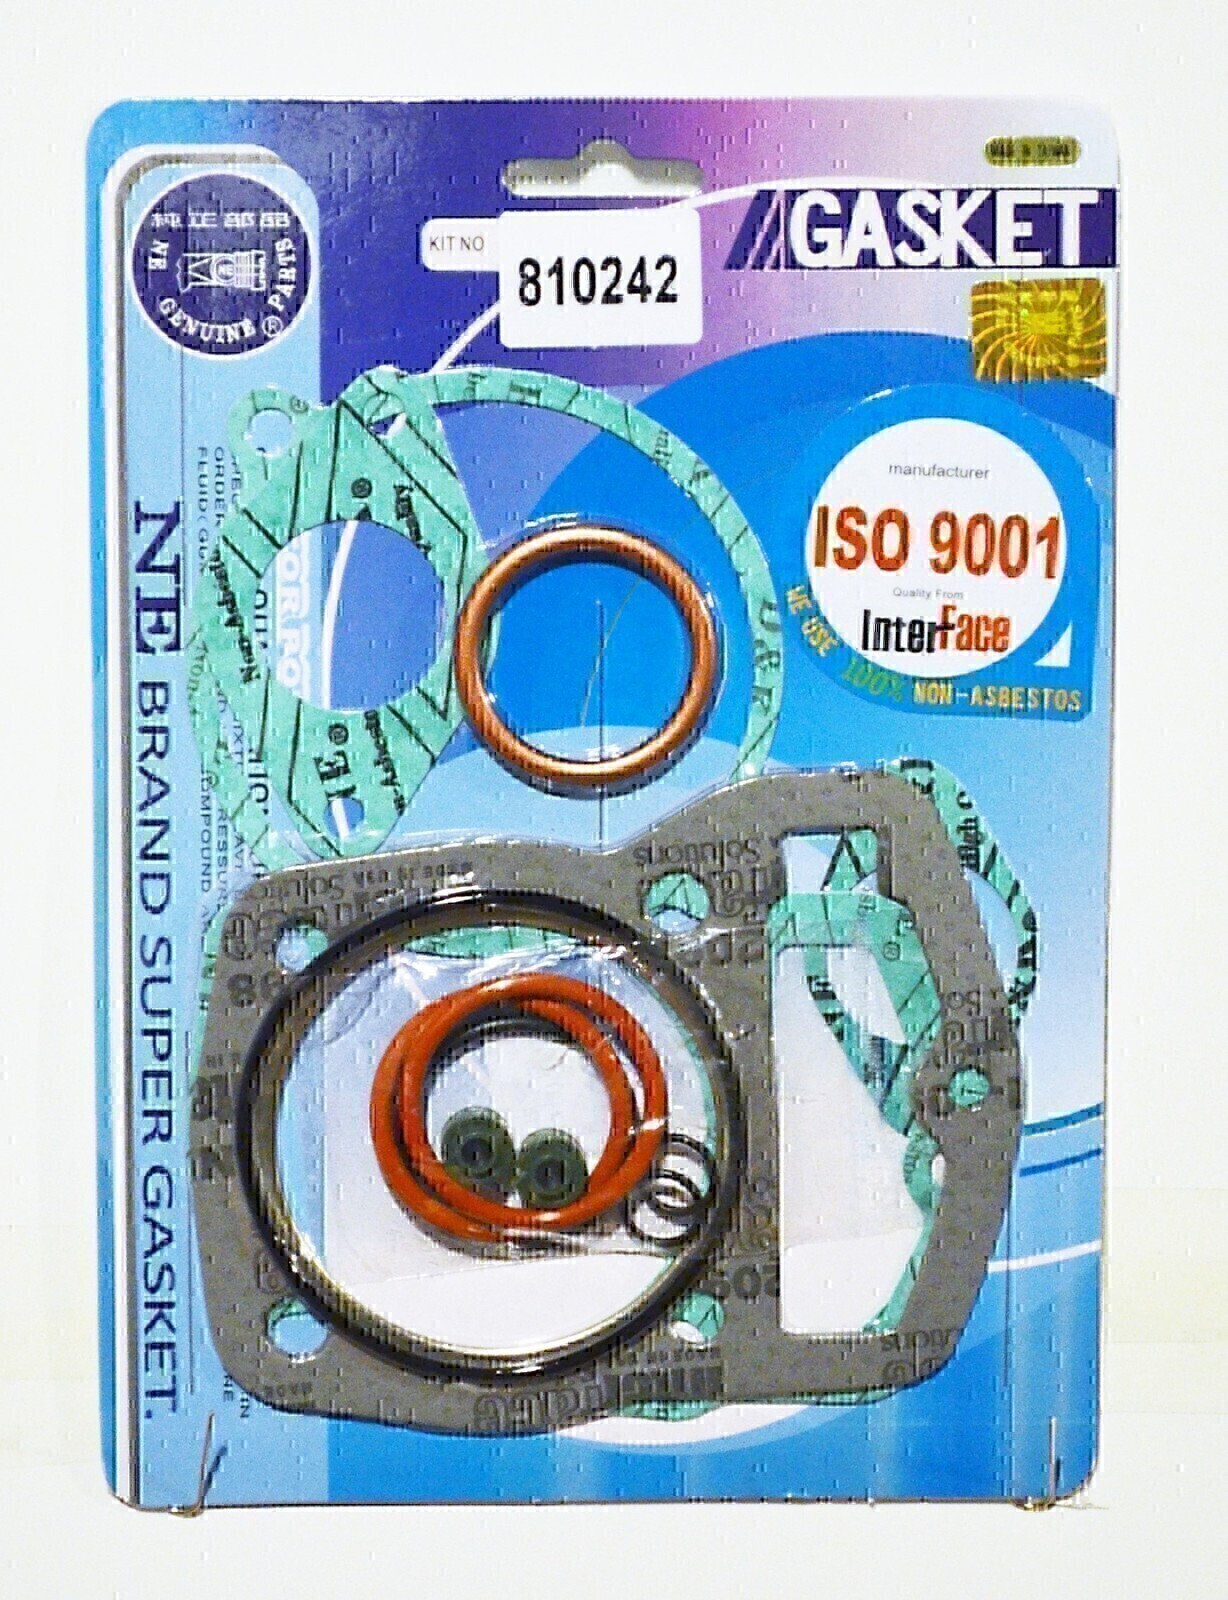 TOP END GASKET KIT FOR HONDA CRF230F CRF 230F 2003 - 2016